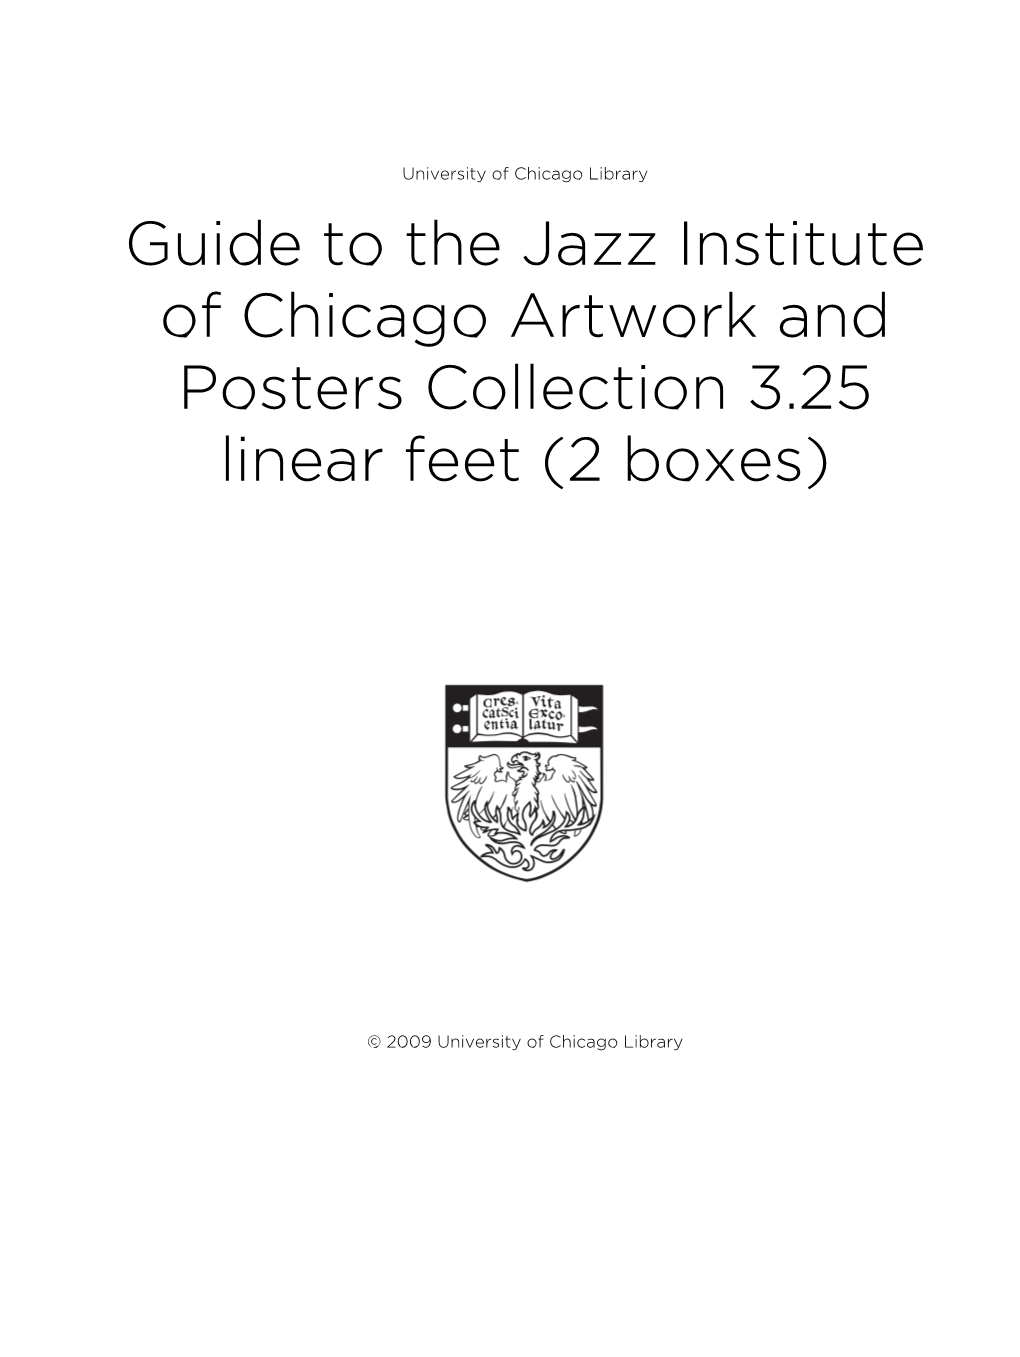 Guide to the Jazz Institute of Chicago Artwork and Posters Collection 3.25 Linear Feet (2 Boxes)